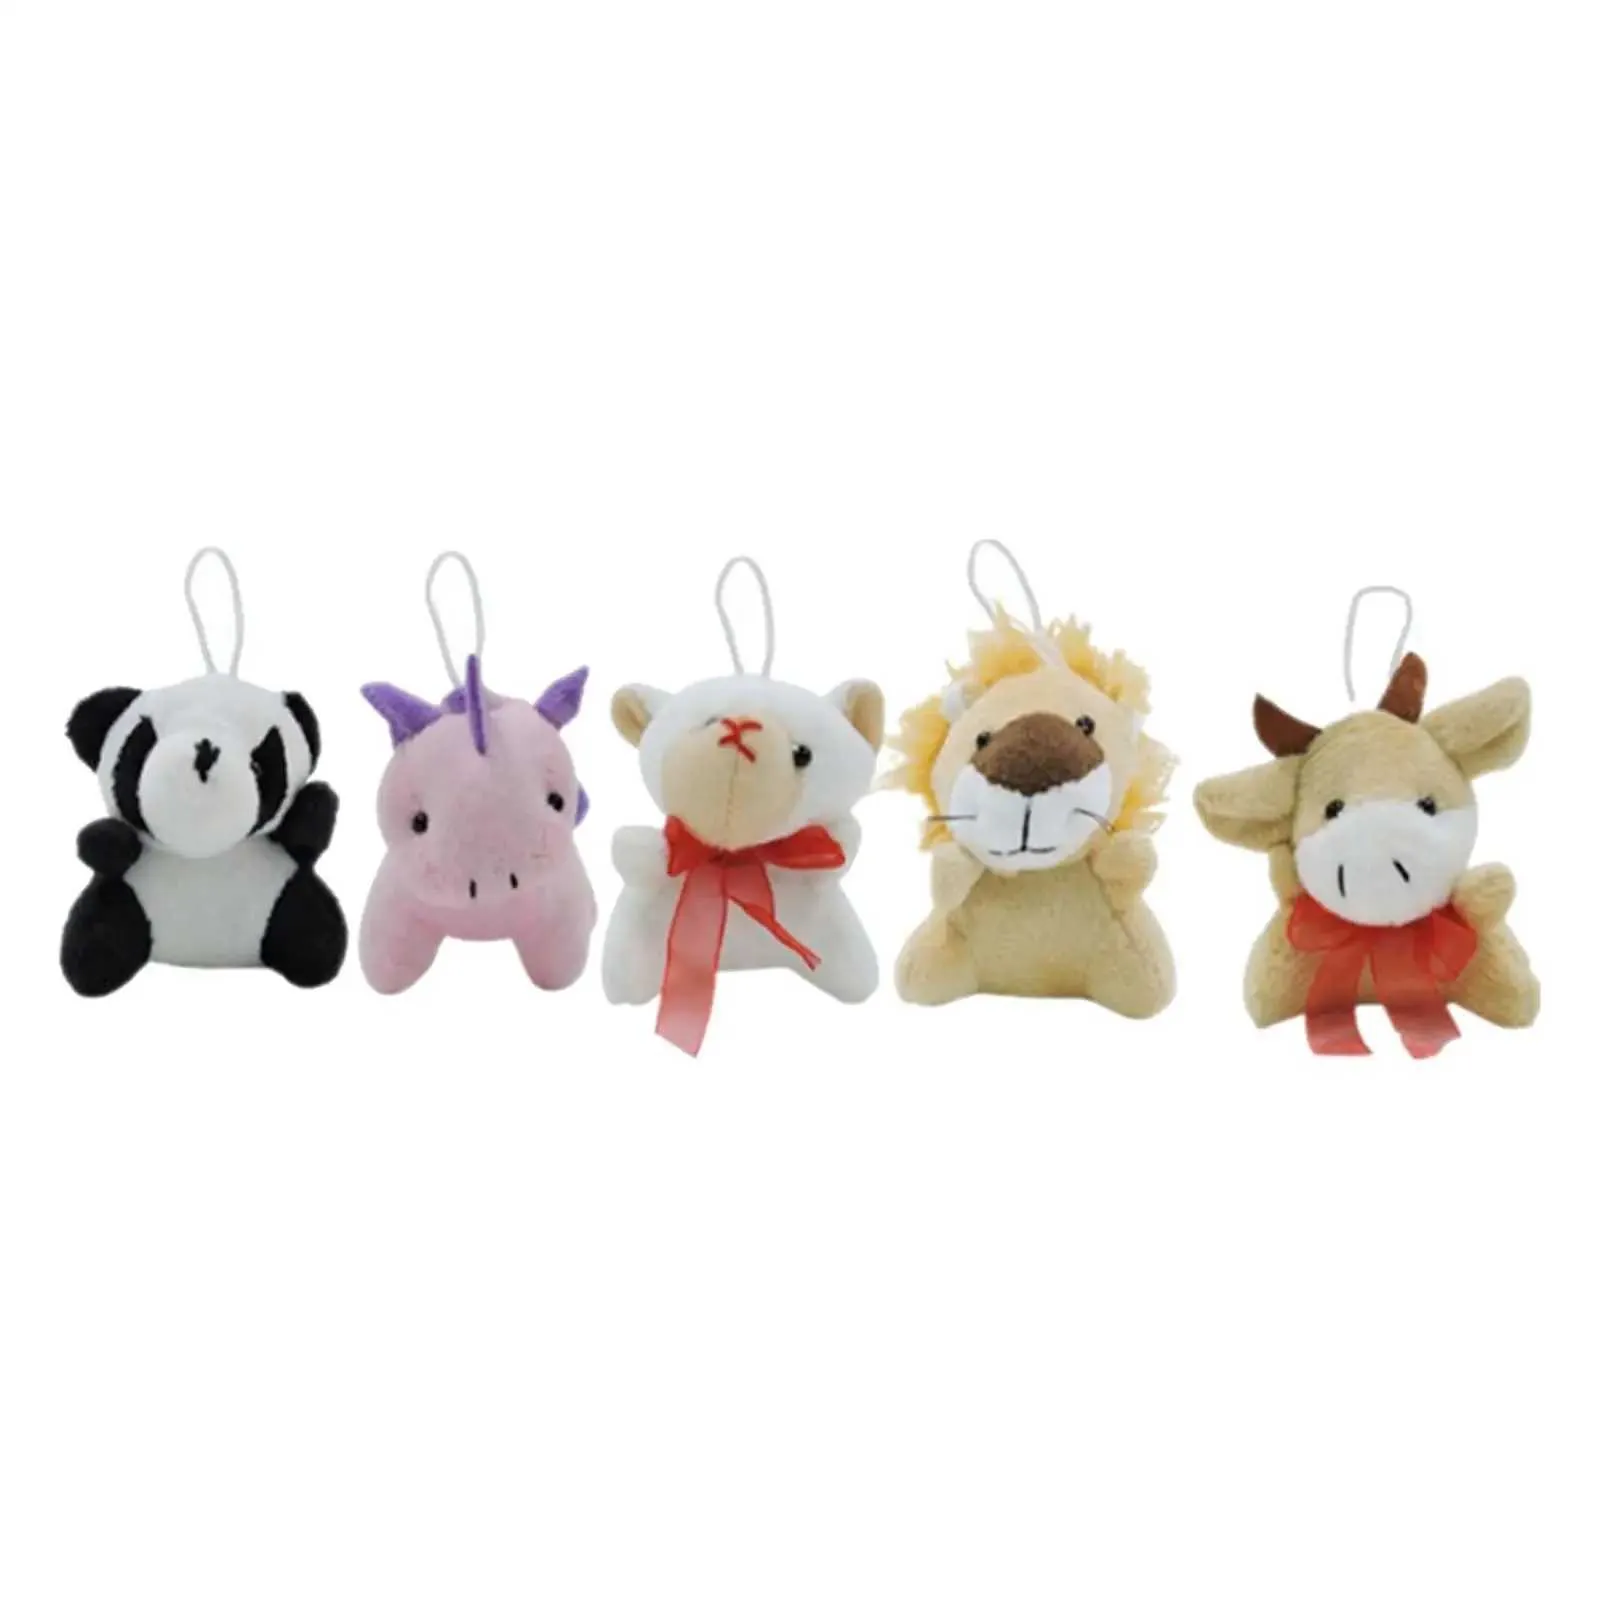 12x Easter Eggs Filled Mini Plush Animal Toy for Kid Gifts Carnival Prizes